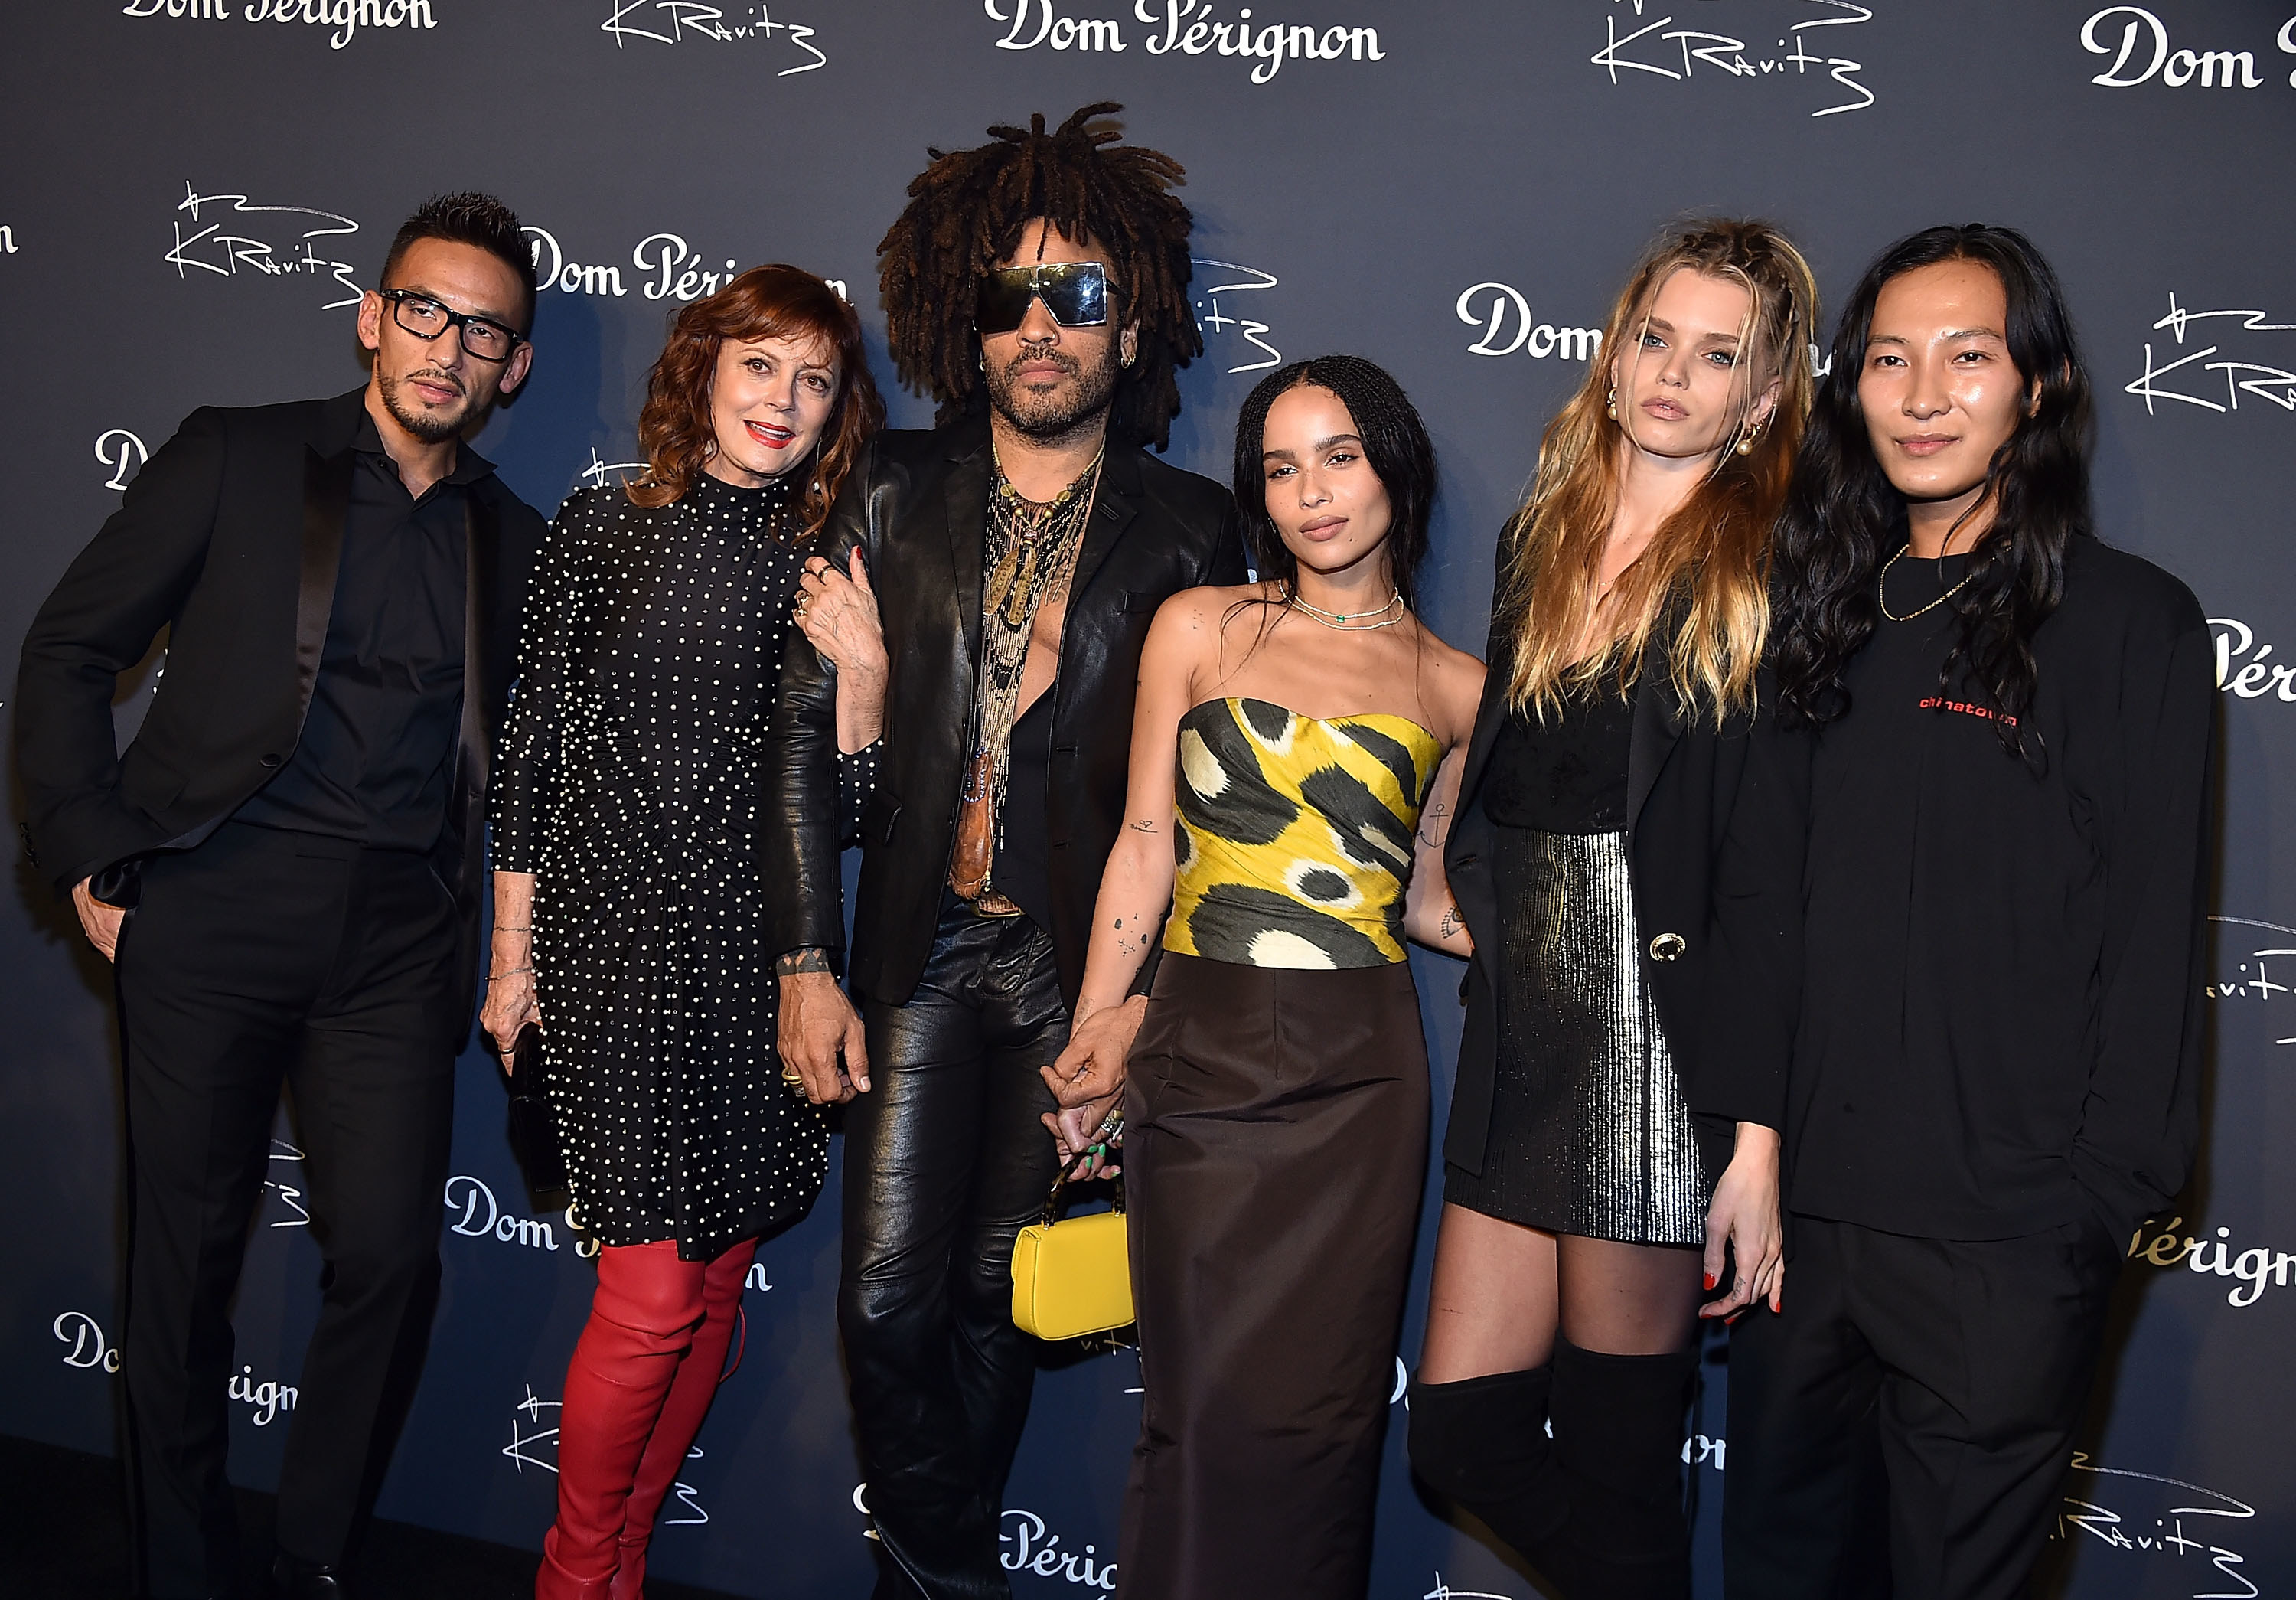 Zoe poses with a group of people that includes her dad, Lenny Kravitz and Alexander Wang